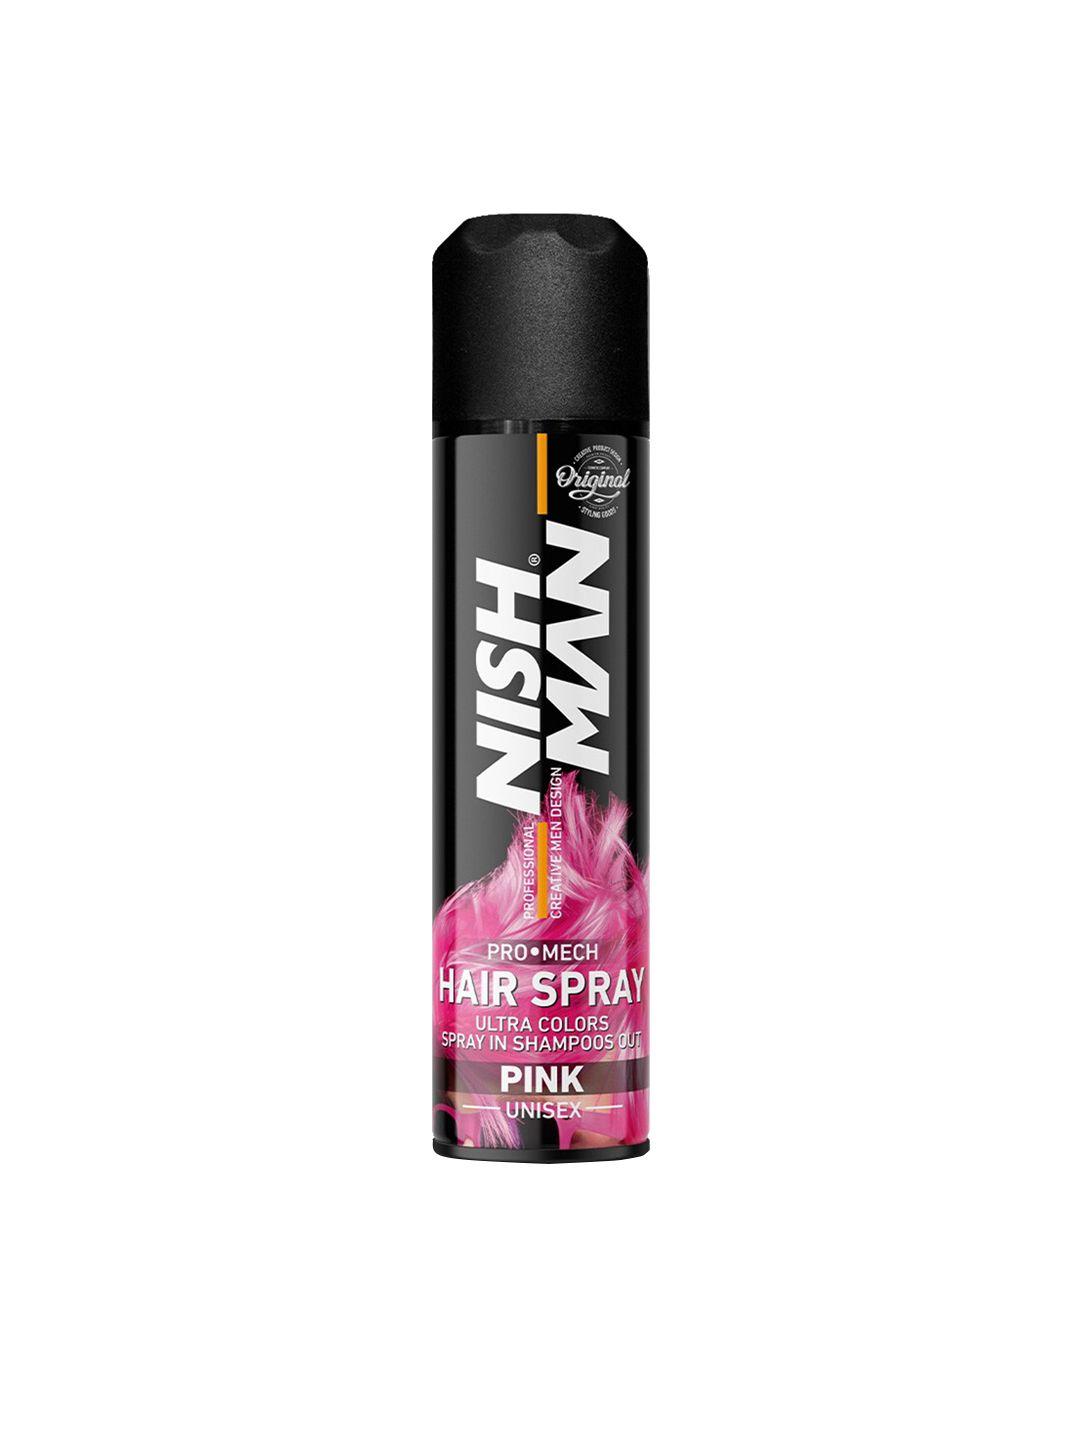 nishman pro mech ultra colors temporary hair color spray 150ml - pink